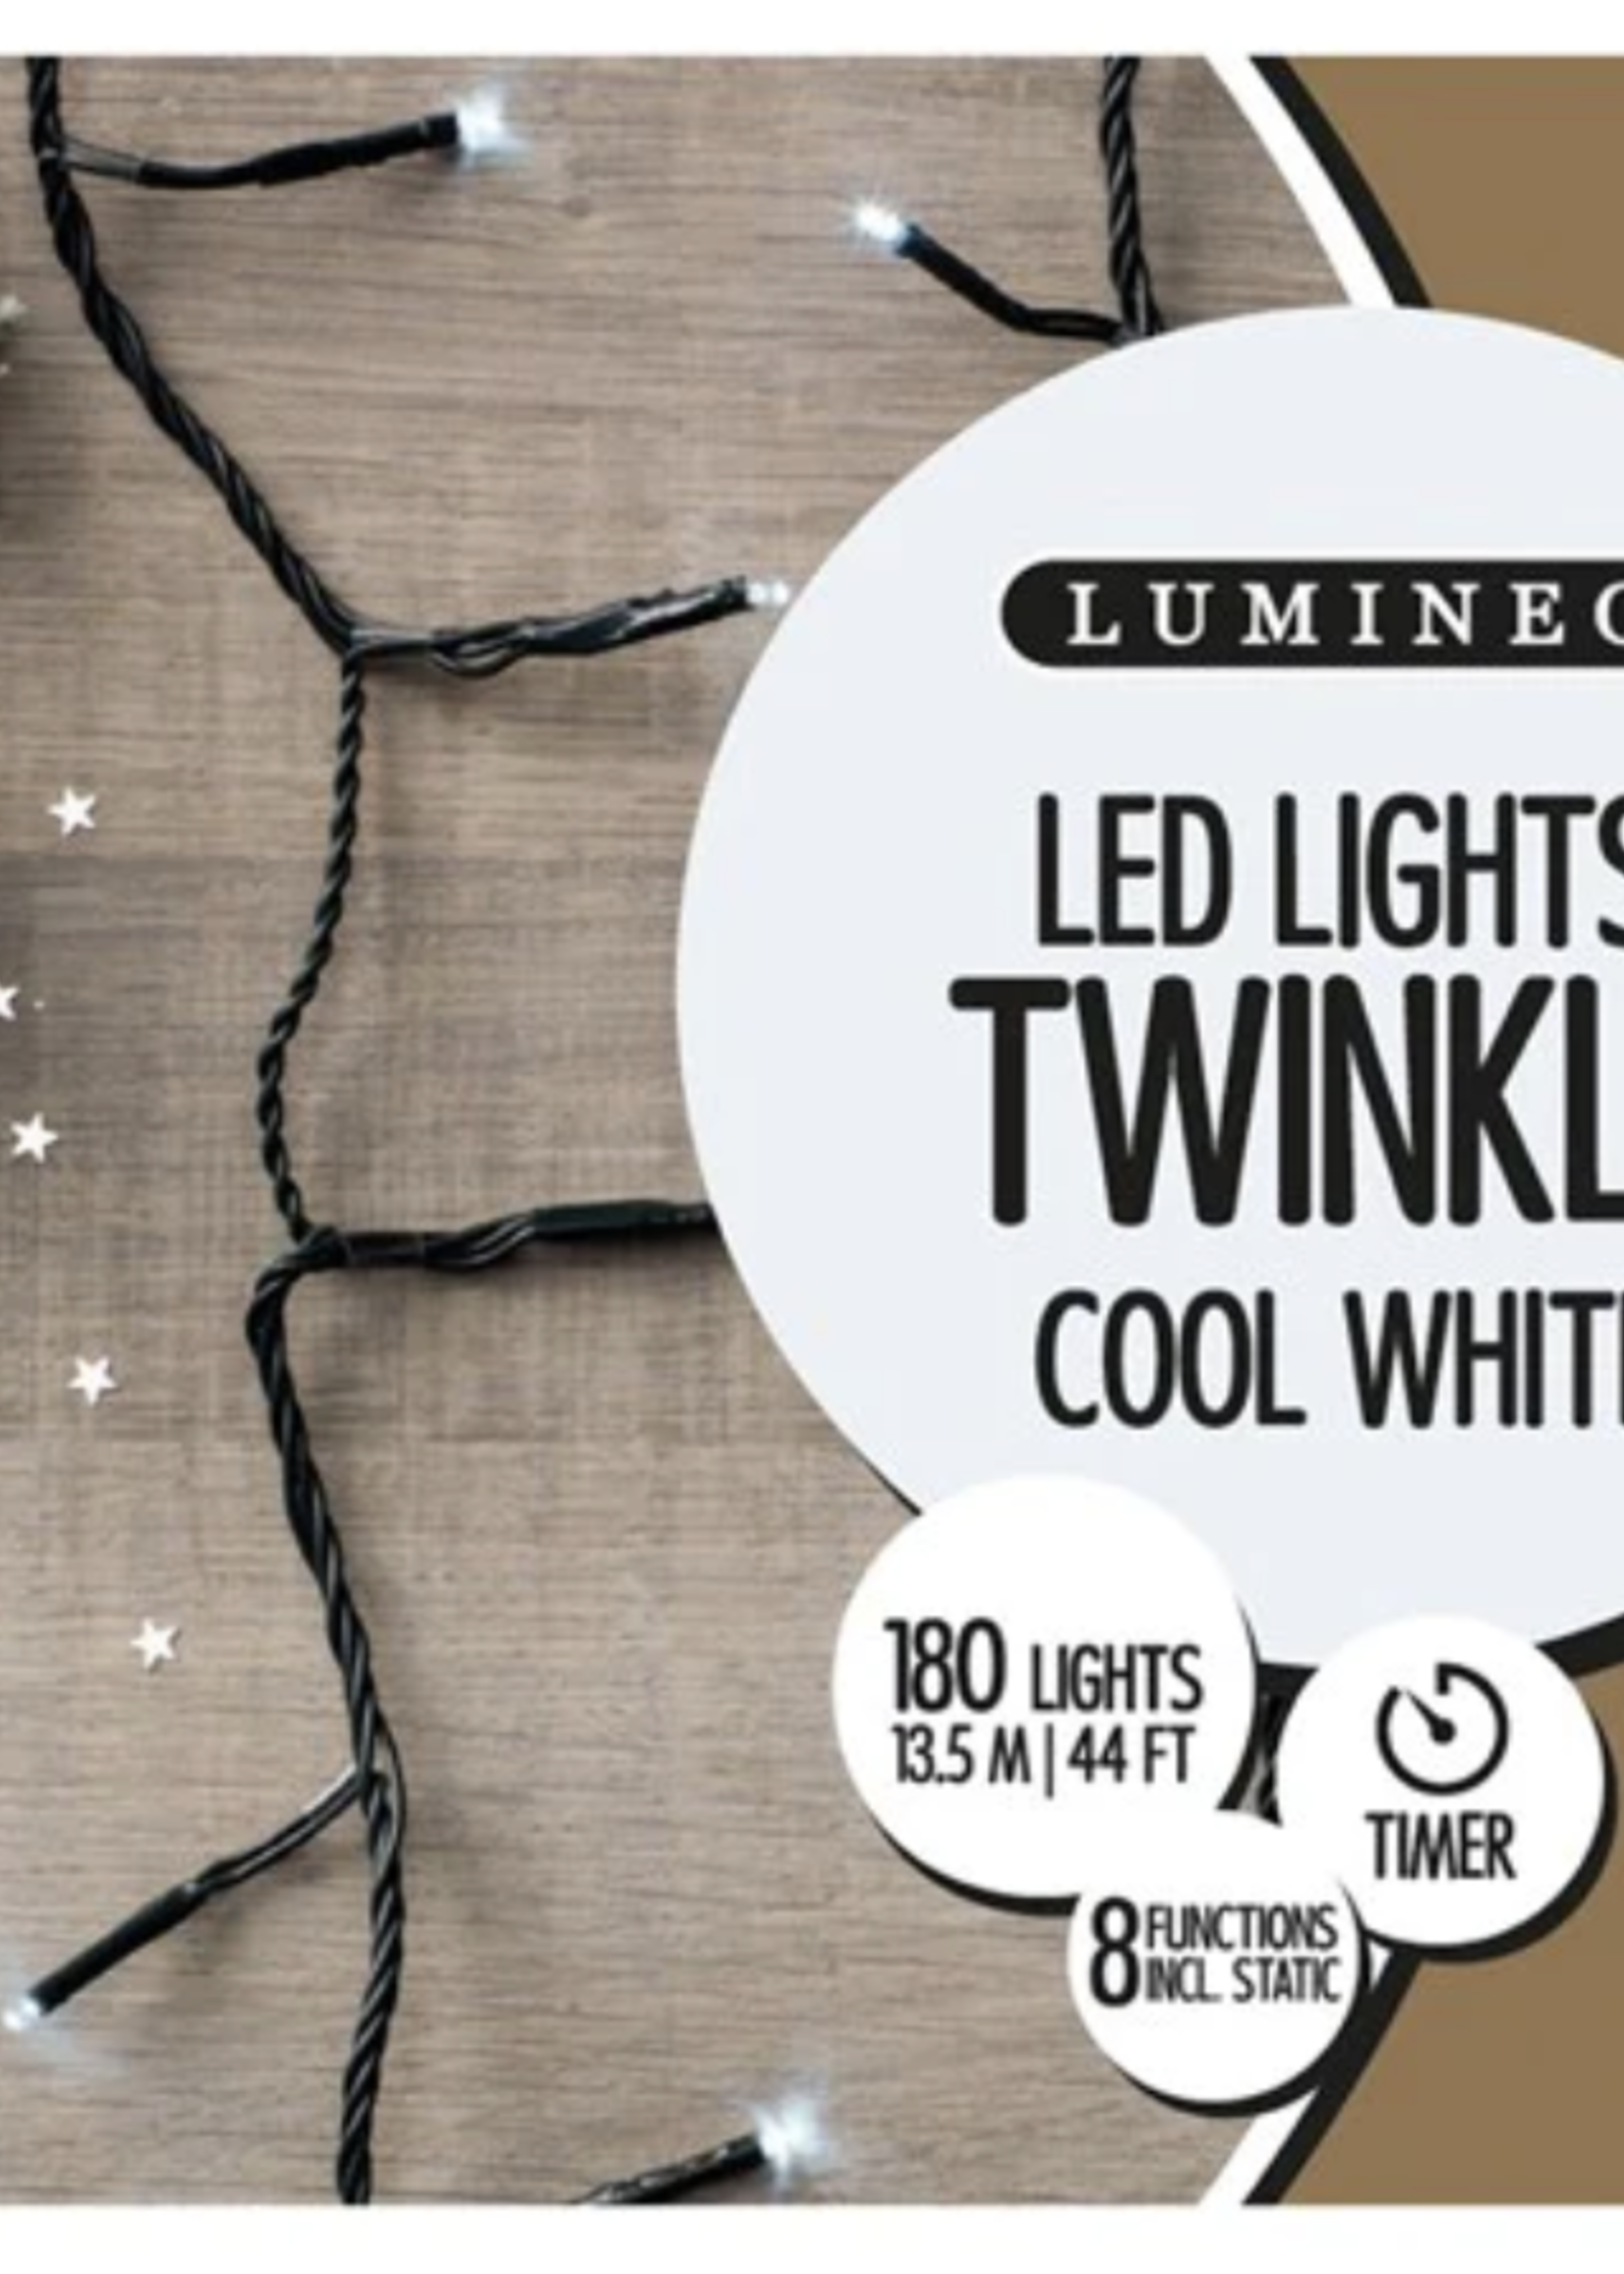 Lumineo Cool White 180 LED twinkle Lights Indoor/Outdoor